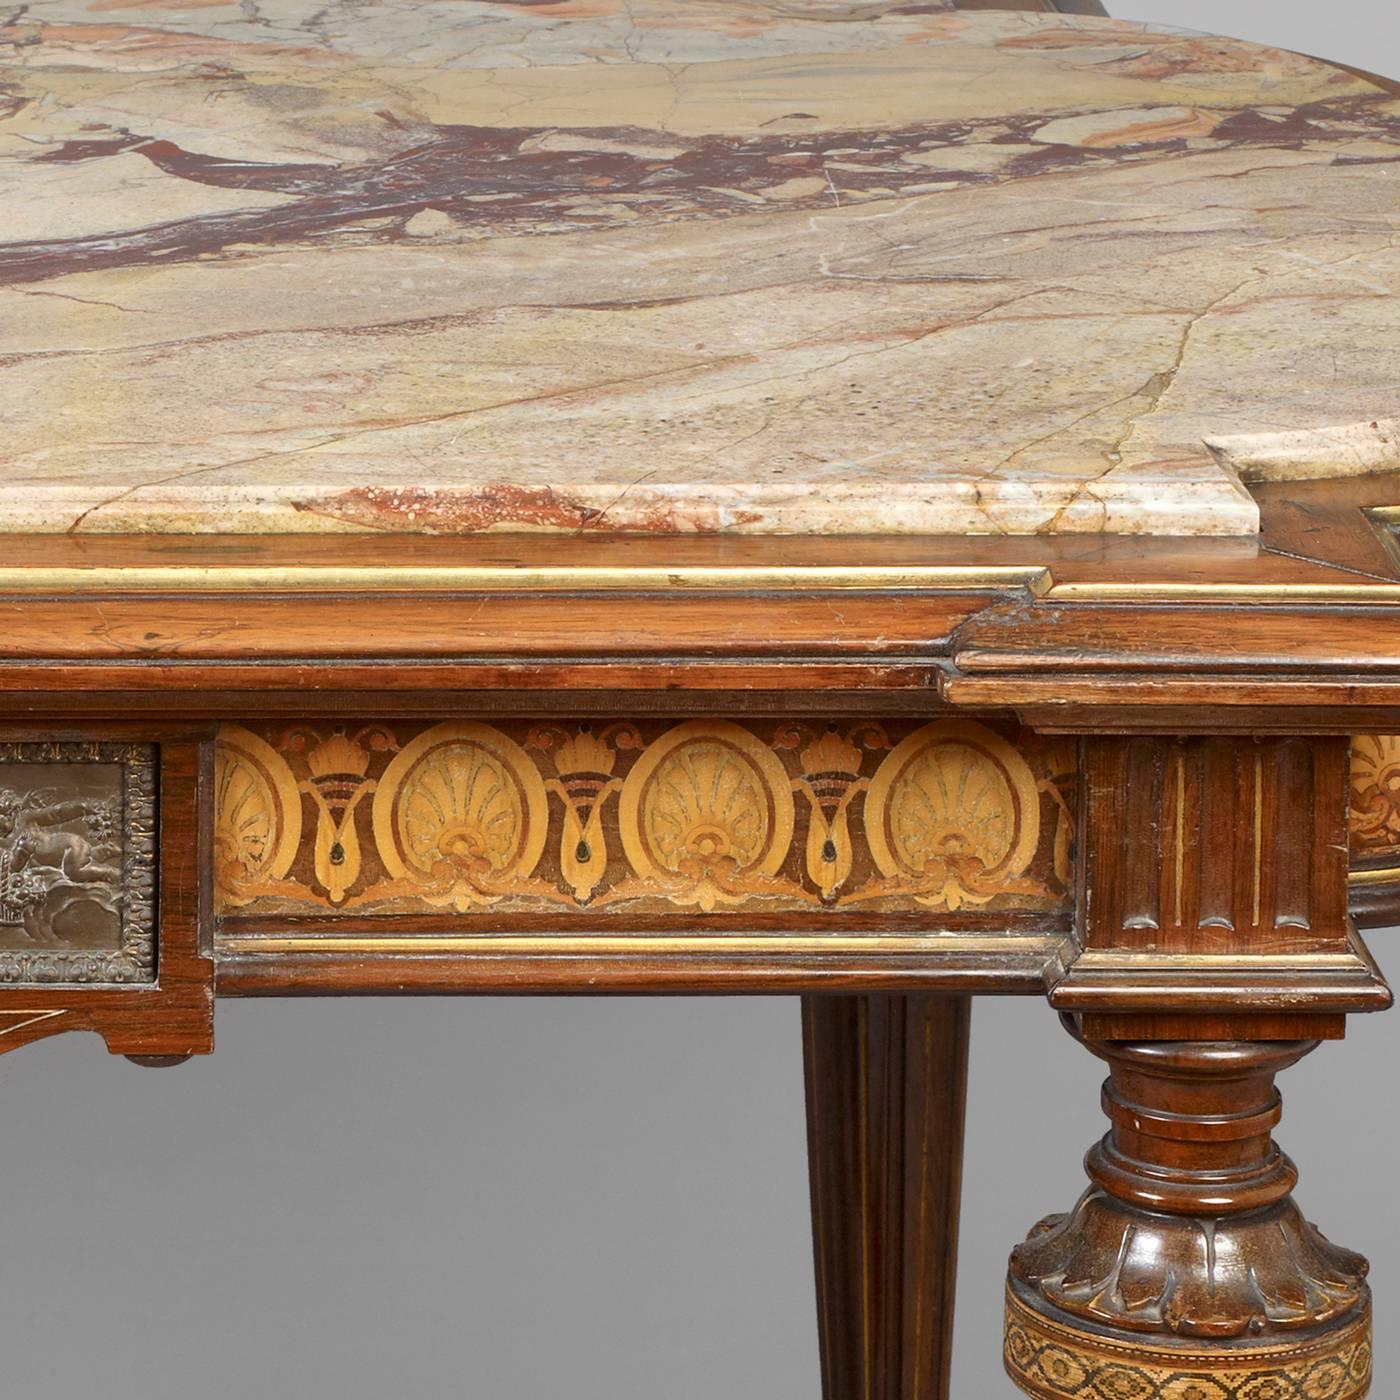 Rosewood, marquetry of various woods; secondary woods: tulip poplar, oak or ash, gilding, gilt brass, bronze. top: Marble, circa 1870.
Customer name "Buell" followed by 36373 marked on top underneath the marble.
The center table exhibits